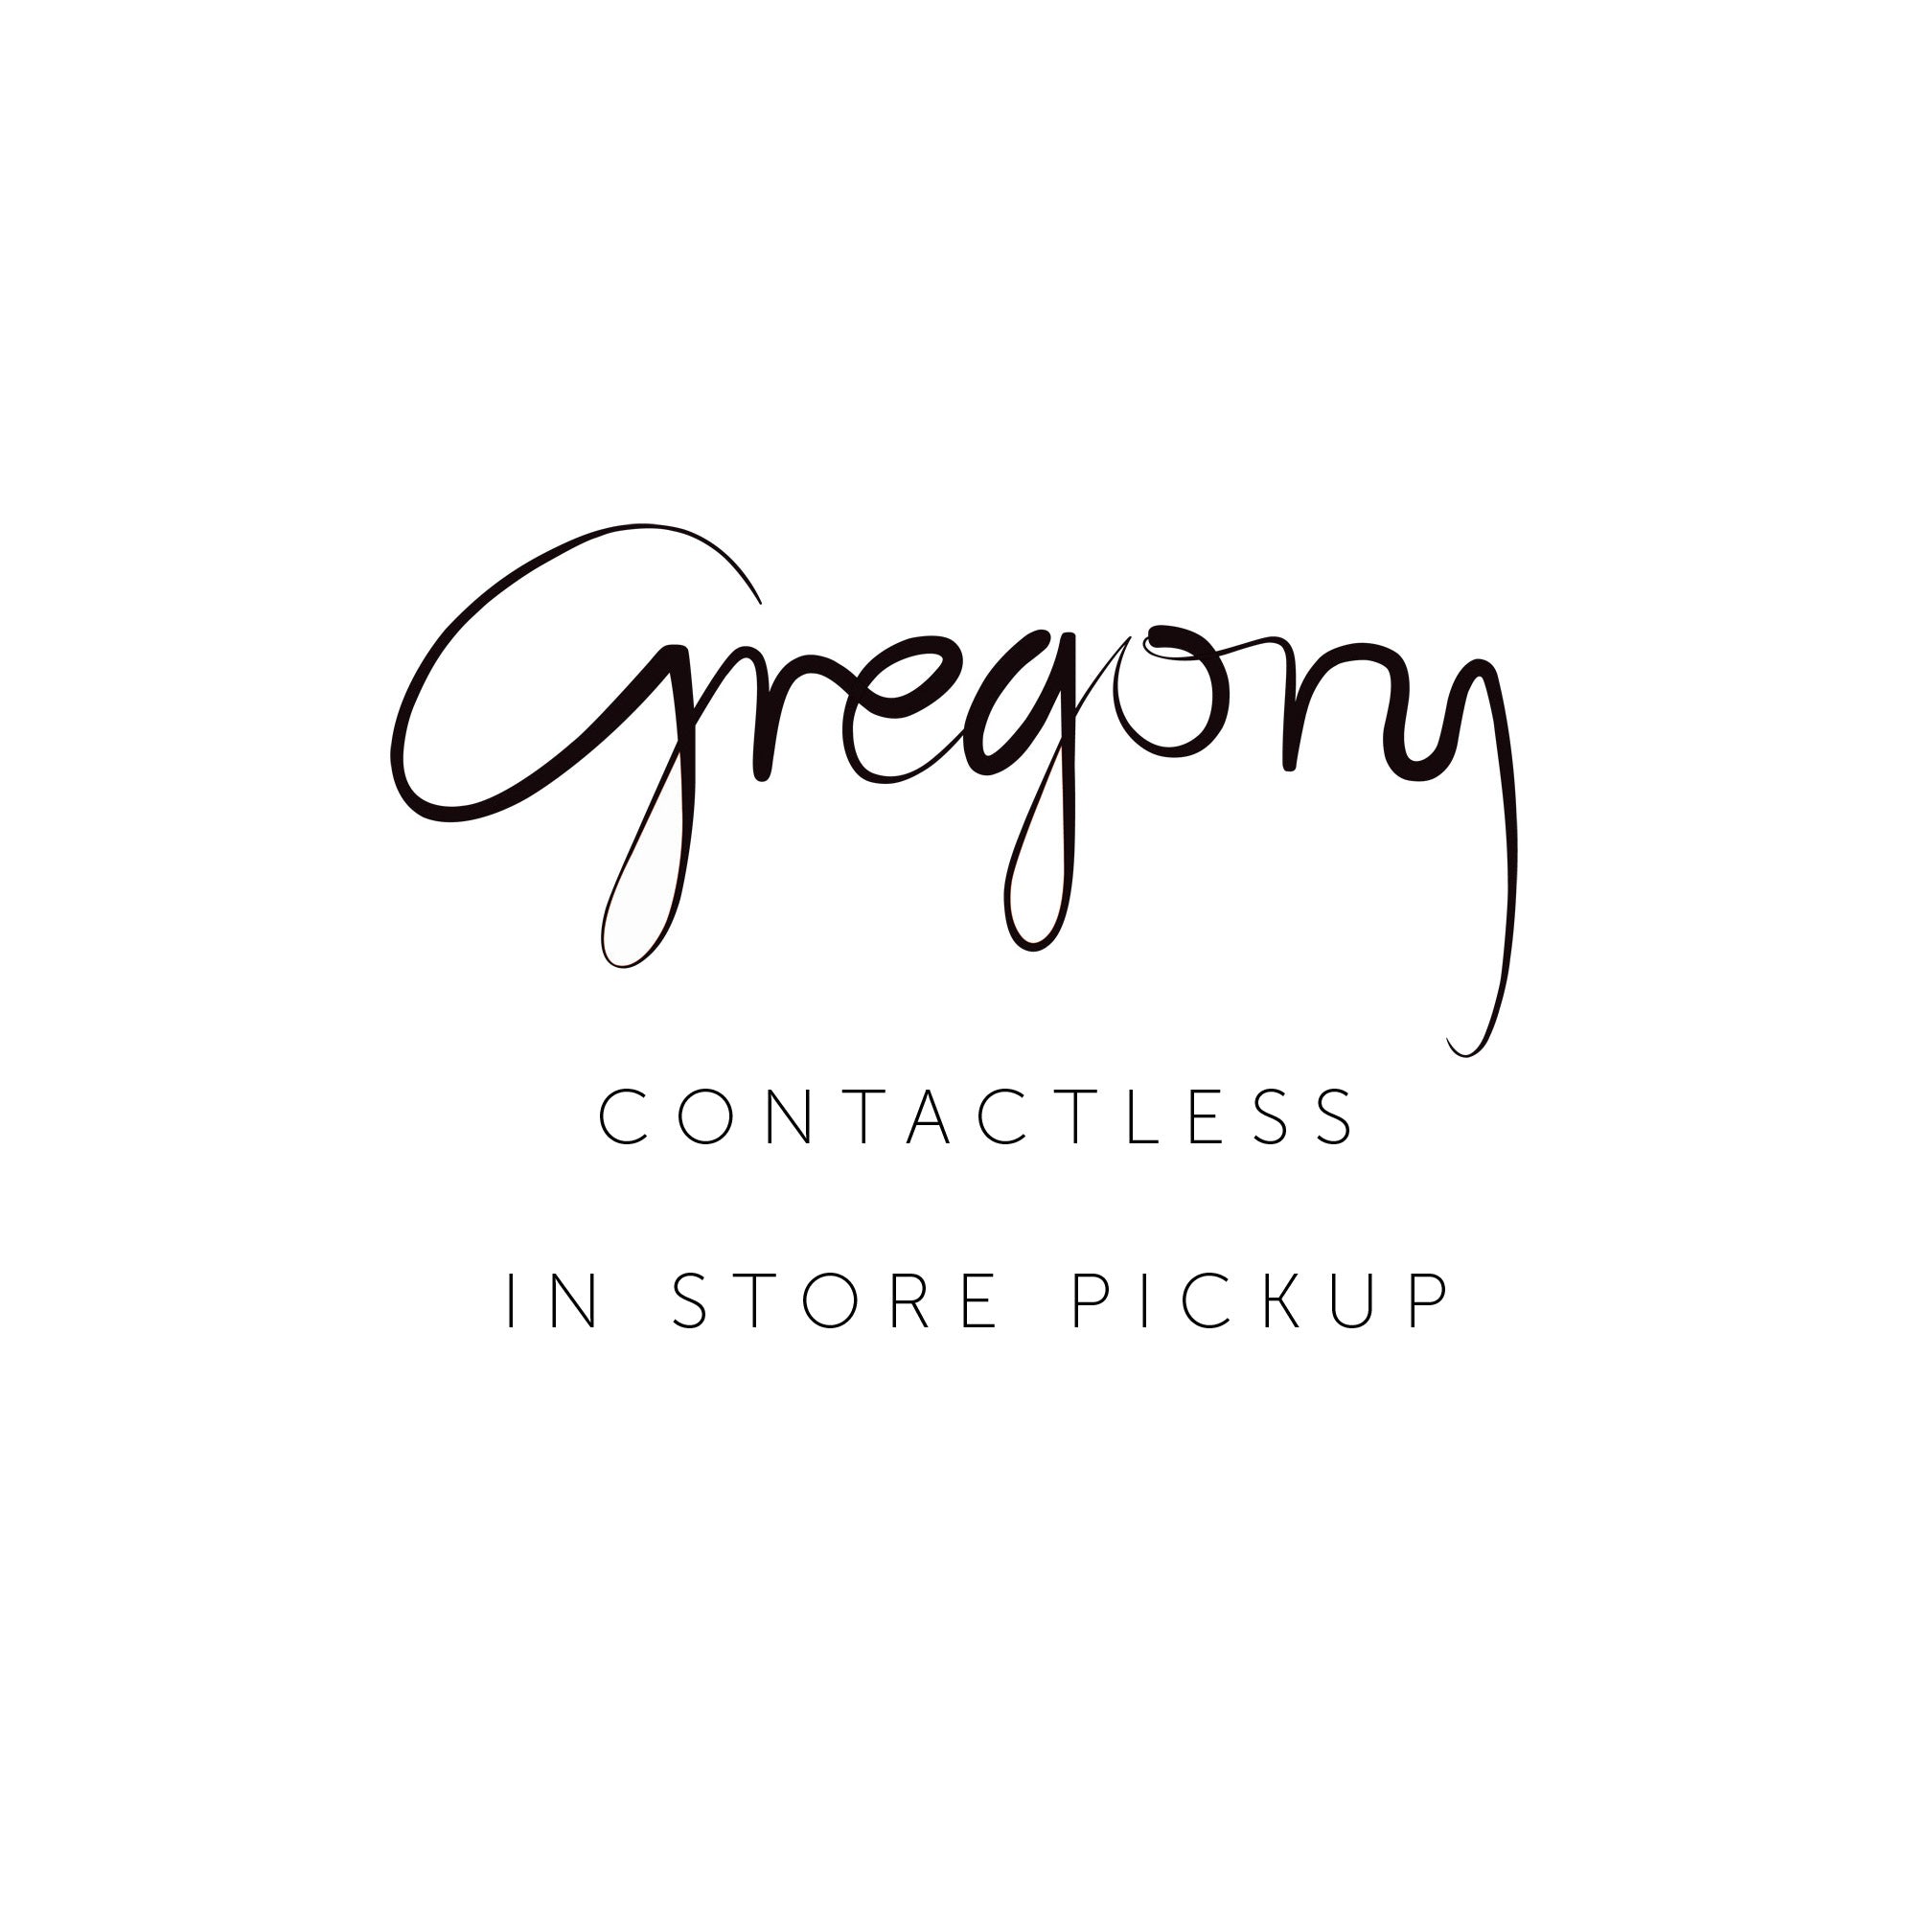 Pickup In store - Gregory